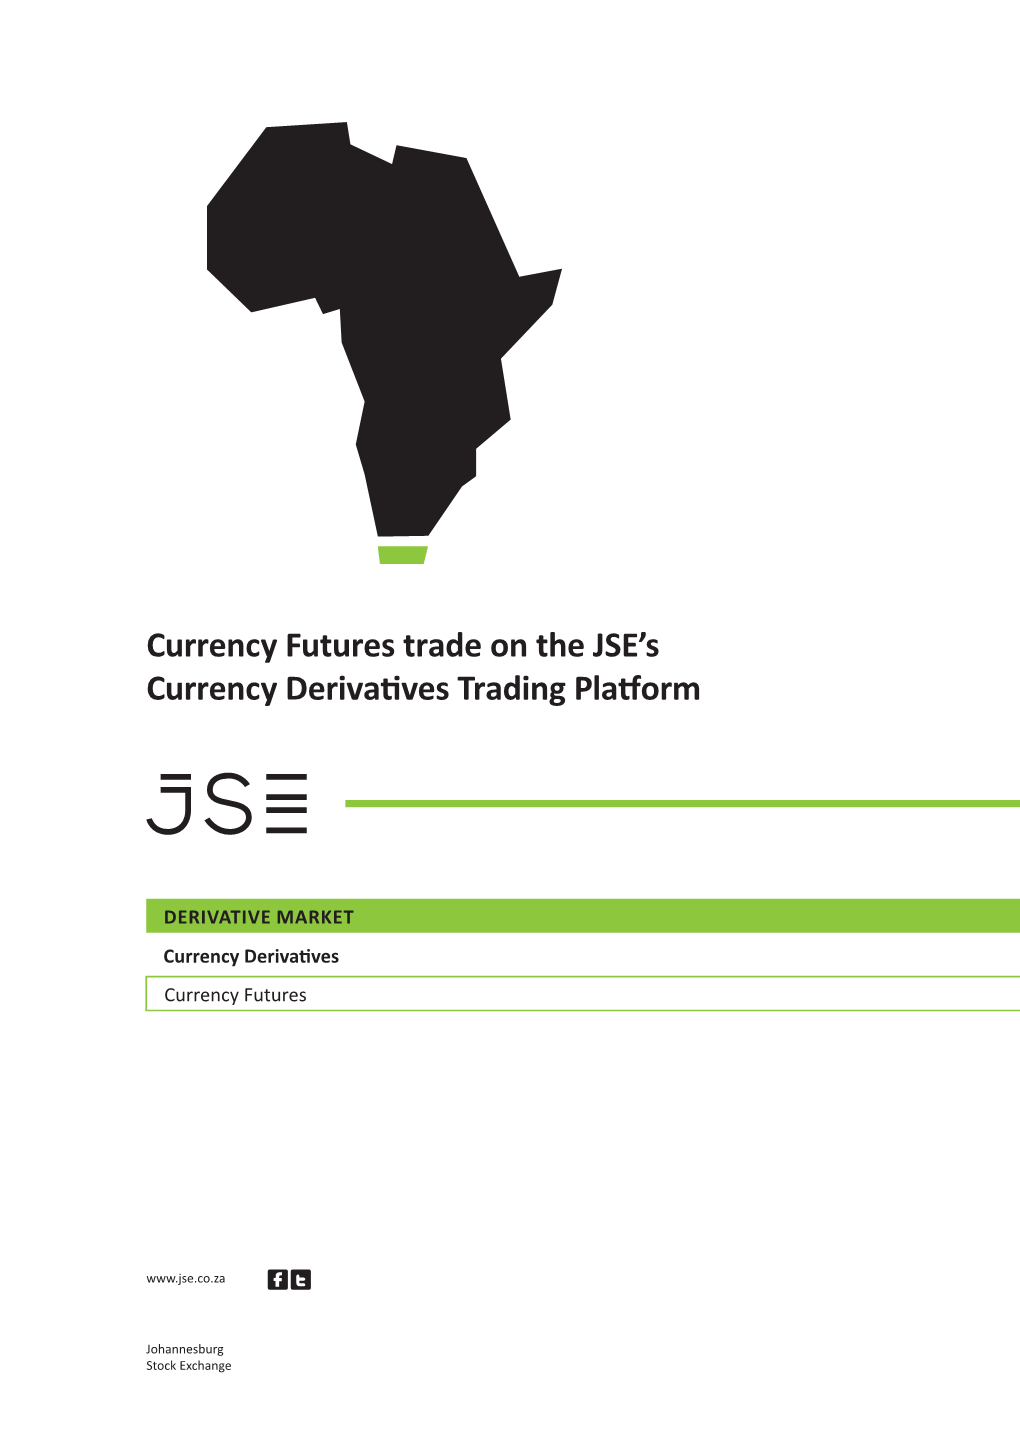 Currency Futures Trade on the JSE's Currency Derivatives Trading Platform